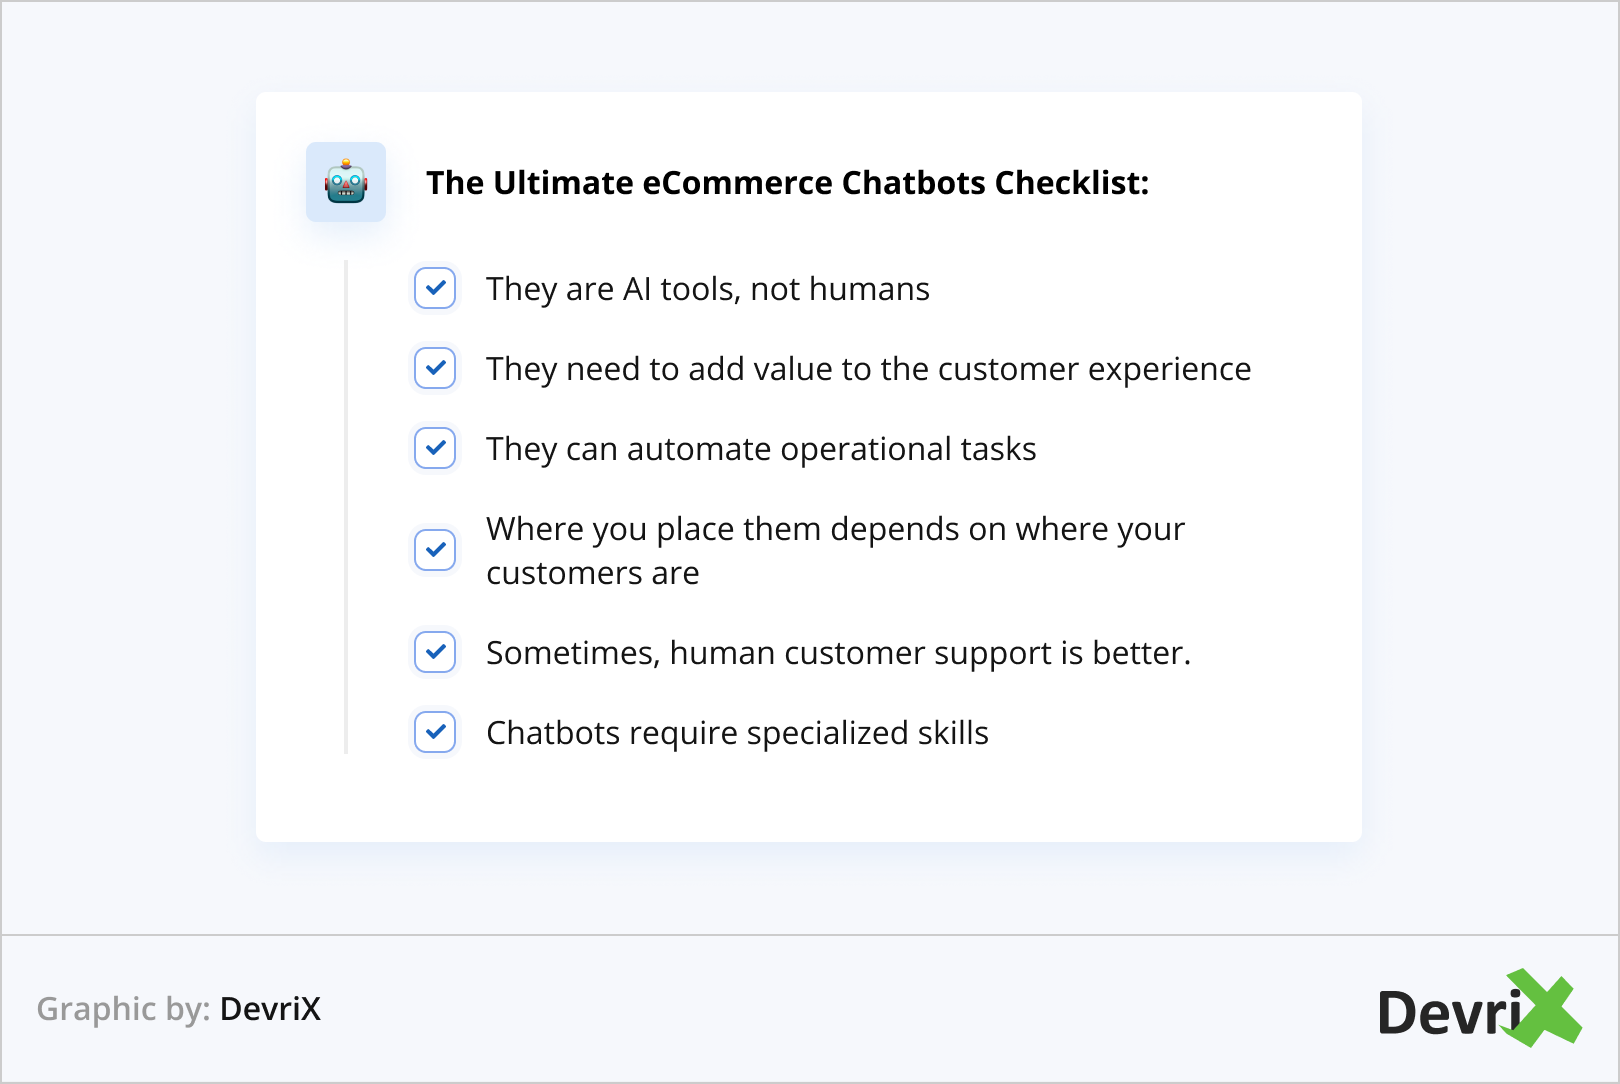 The Ultimate eCommerce Chatbots Checklist